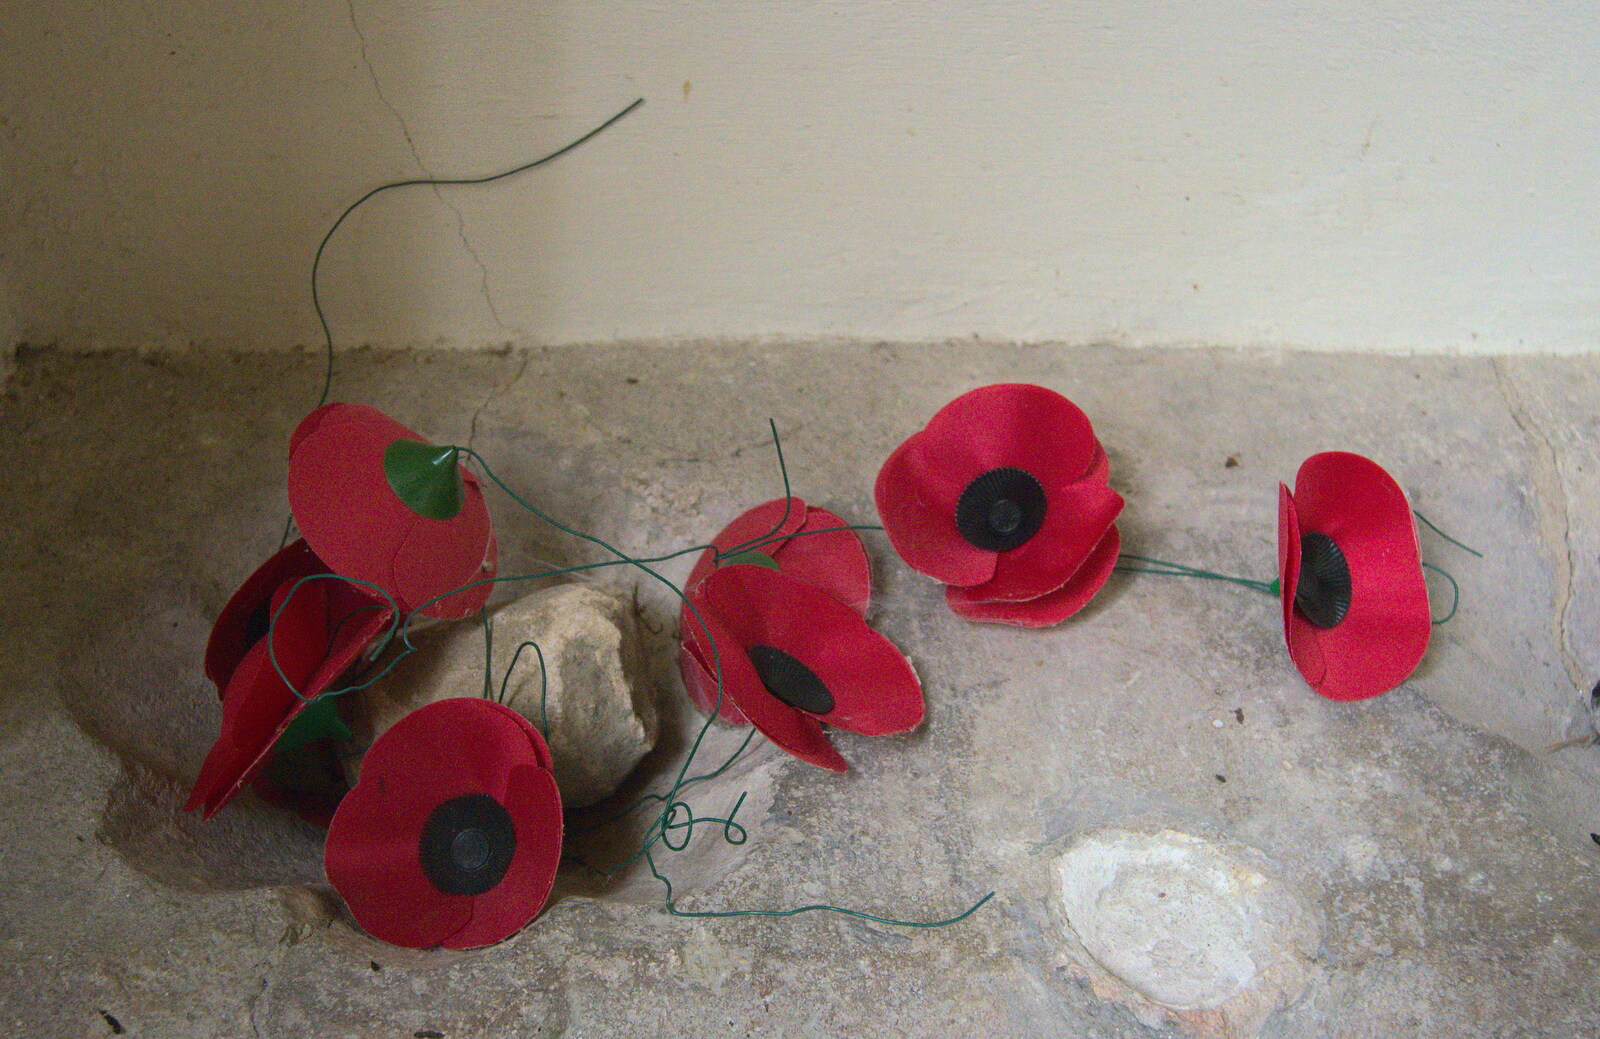 A display of poppies from Camping at Dower House, West Harling, Norfolk - 1st September 2012